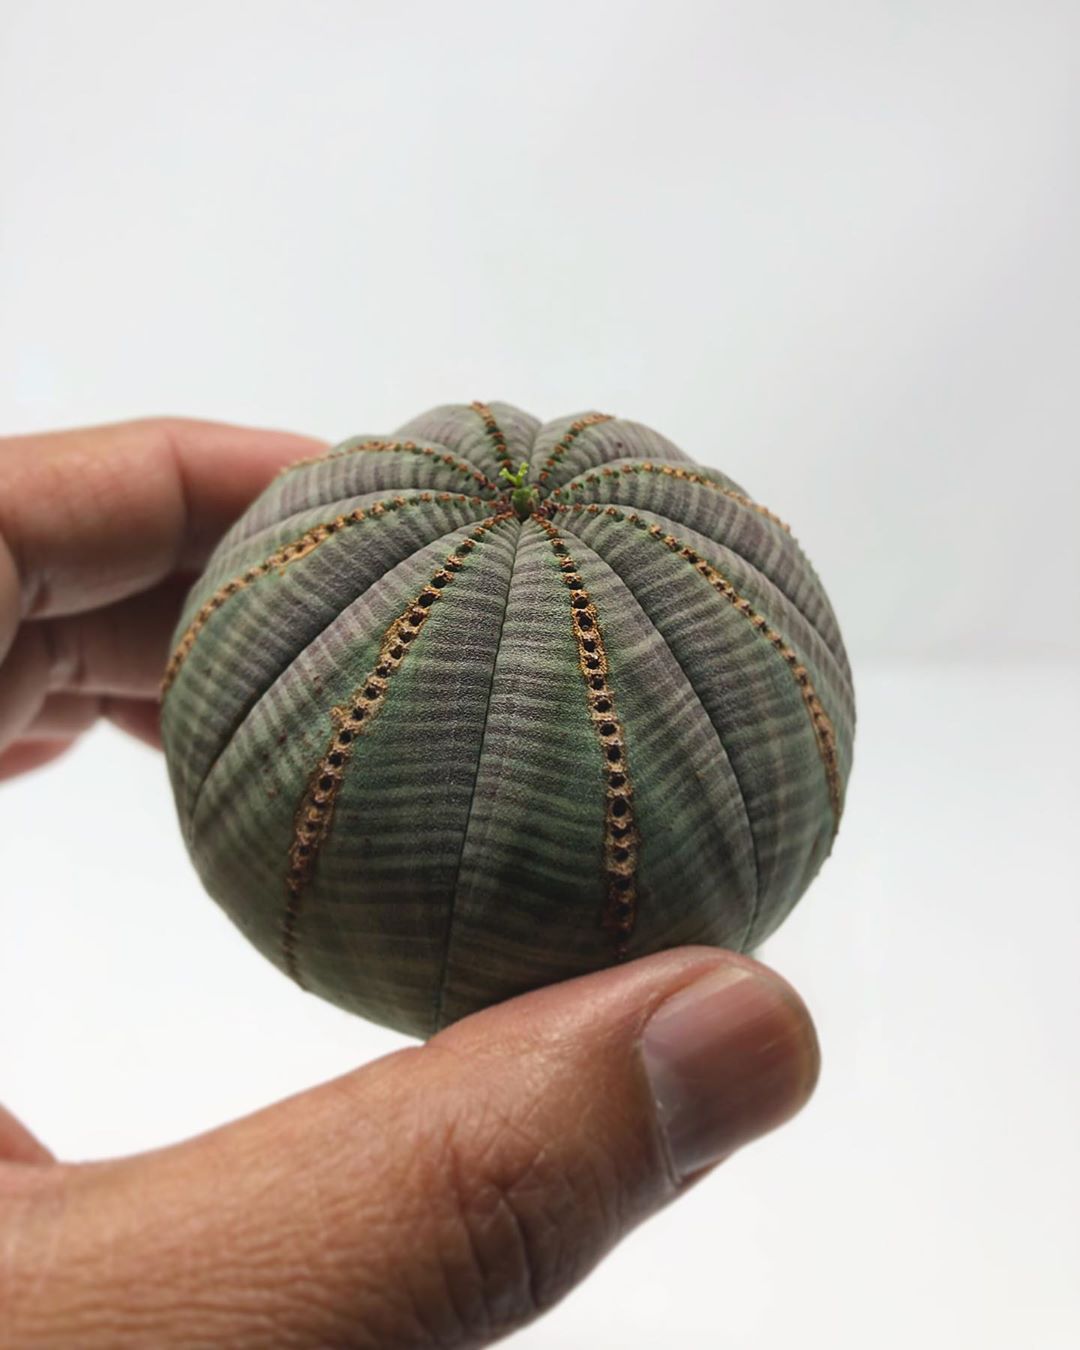 This is not a pin cushion, this is a succulent plant called Euphorbia obesa.